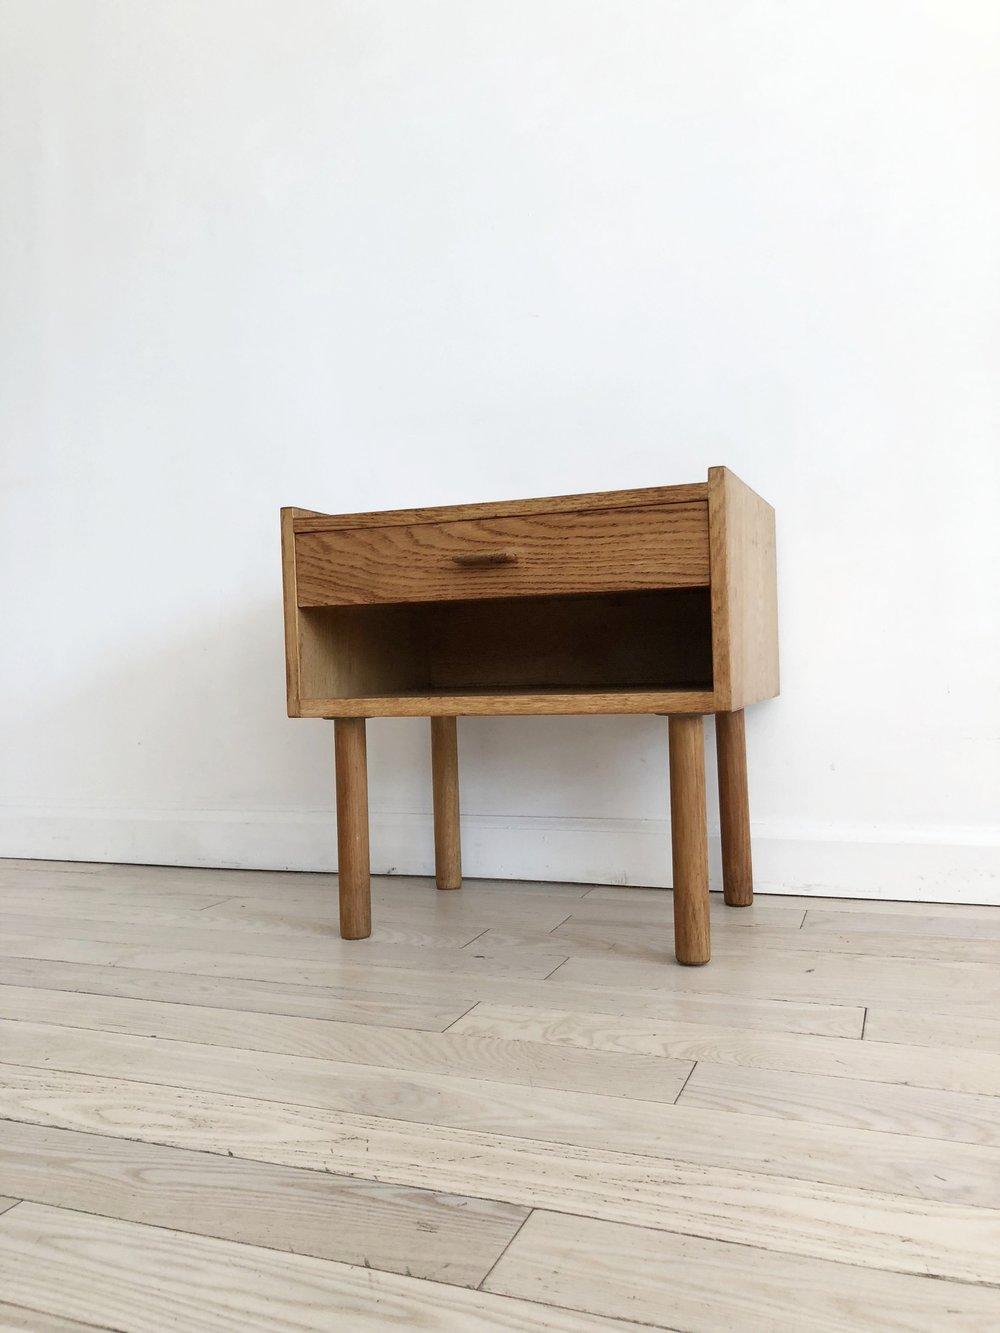 Wonderful oak bedside table with cubby and single drawer designed by Hans J. Wegner for Ry Mobler, Denmark. Cubby height is 3.85 inches. Beautiful cylinder legs, Wegner staple. Solid oak, even the drawer. Finished on all sides, great for a side